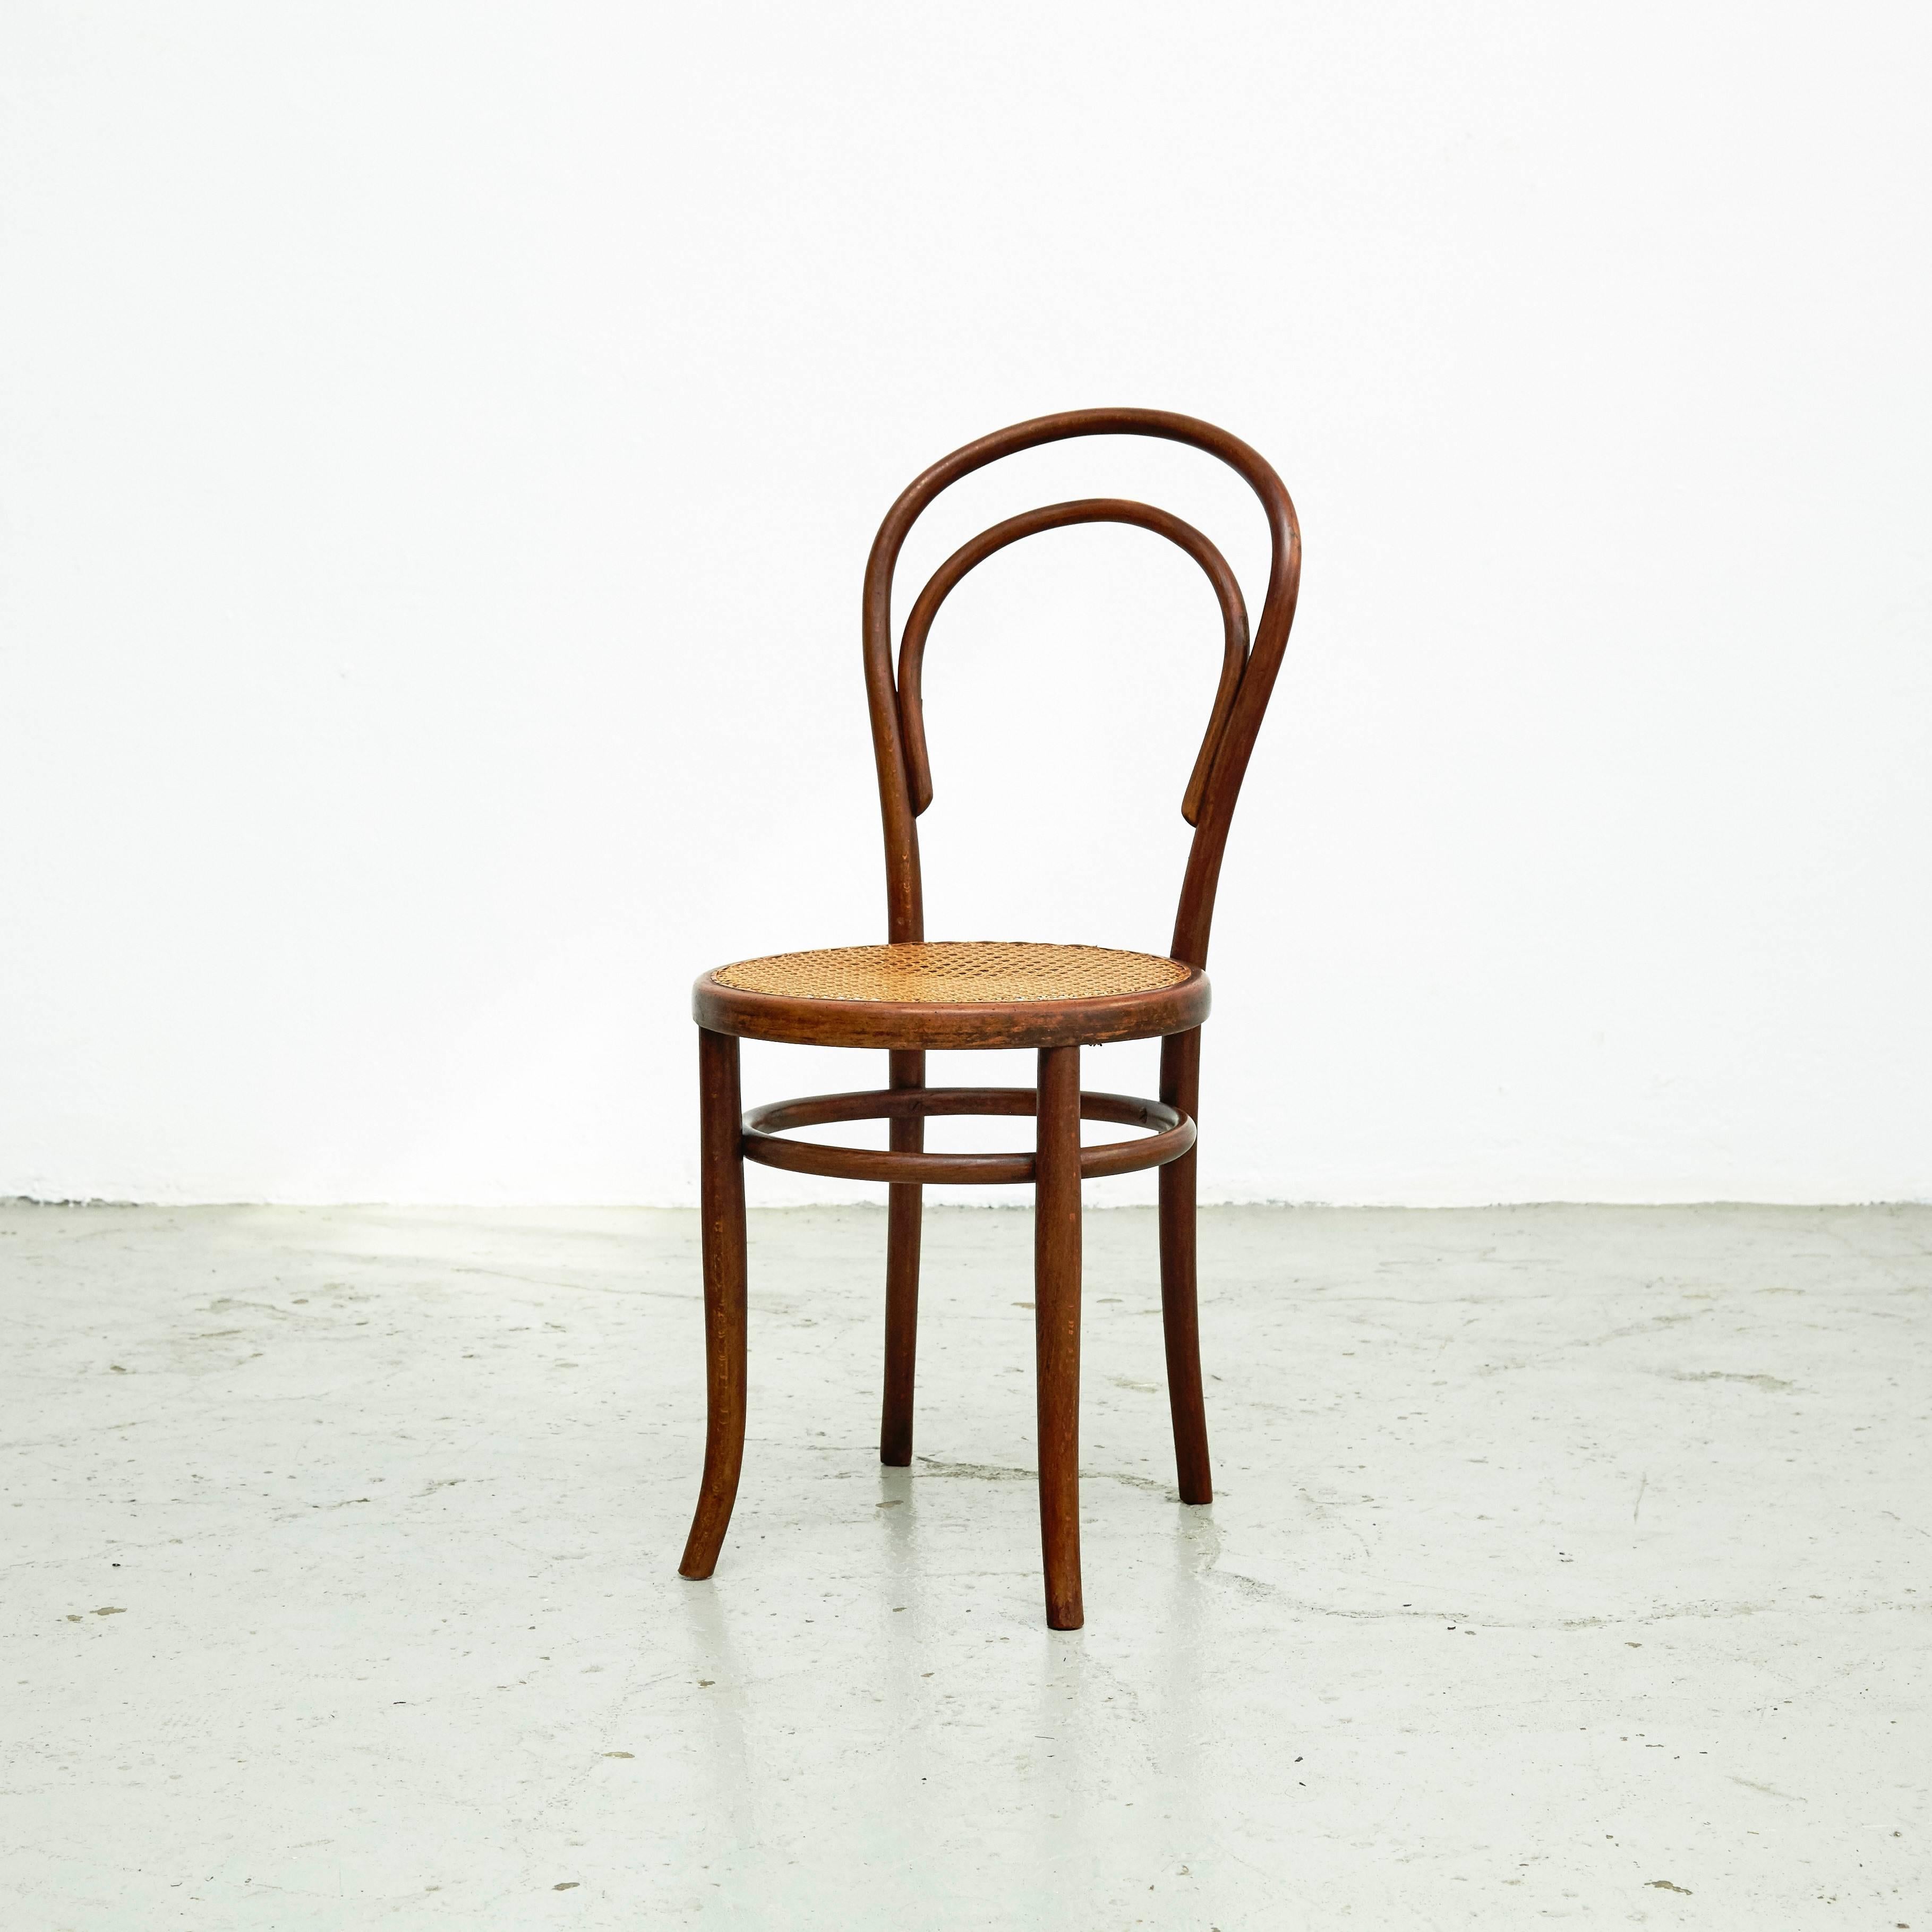 Other Set of Ten Chairs by Thonet, Fischel, Kohn and Unknown, circa 1900